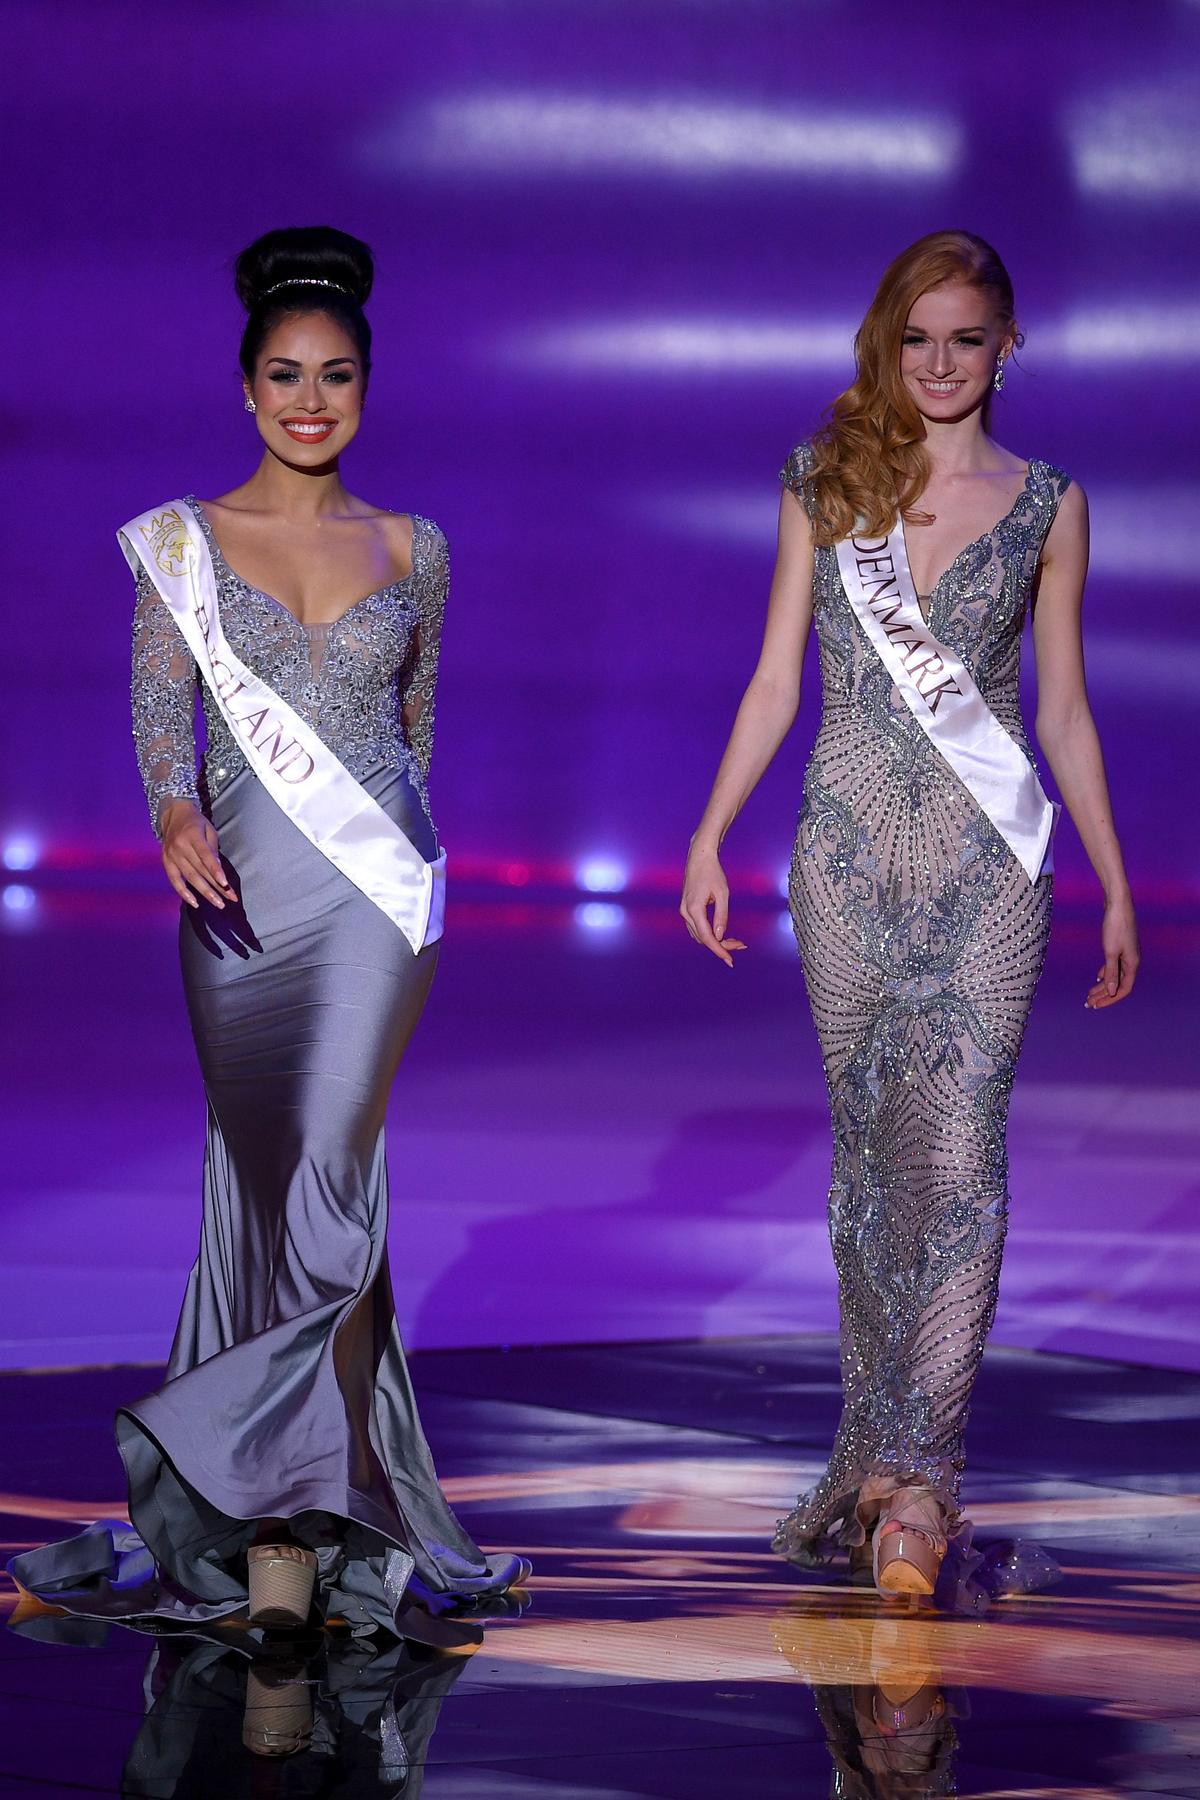 Miss England, Bhasha Mukherjee (L), and Miss Denmark, Natasja Kunde, during the Miss World Finals at the Excel arena in east London, England, on Dec. 14, 2019. (DANIEL LEAL-OLIVAS/AFP via Getty Images)